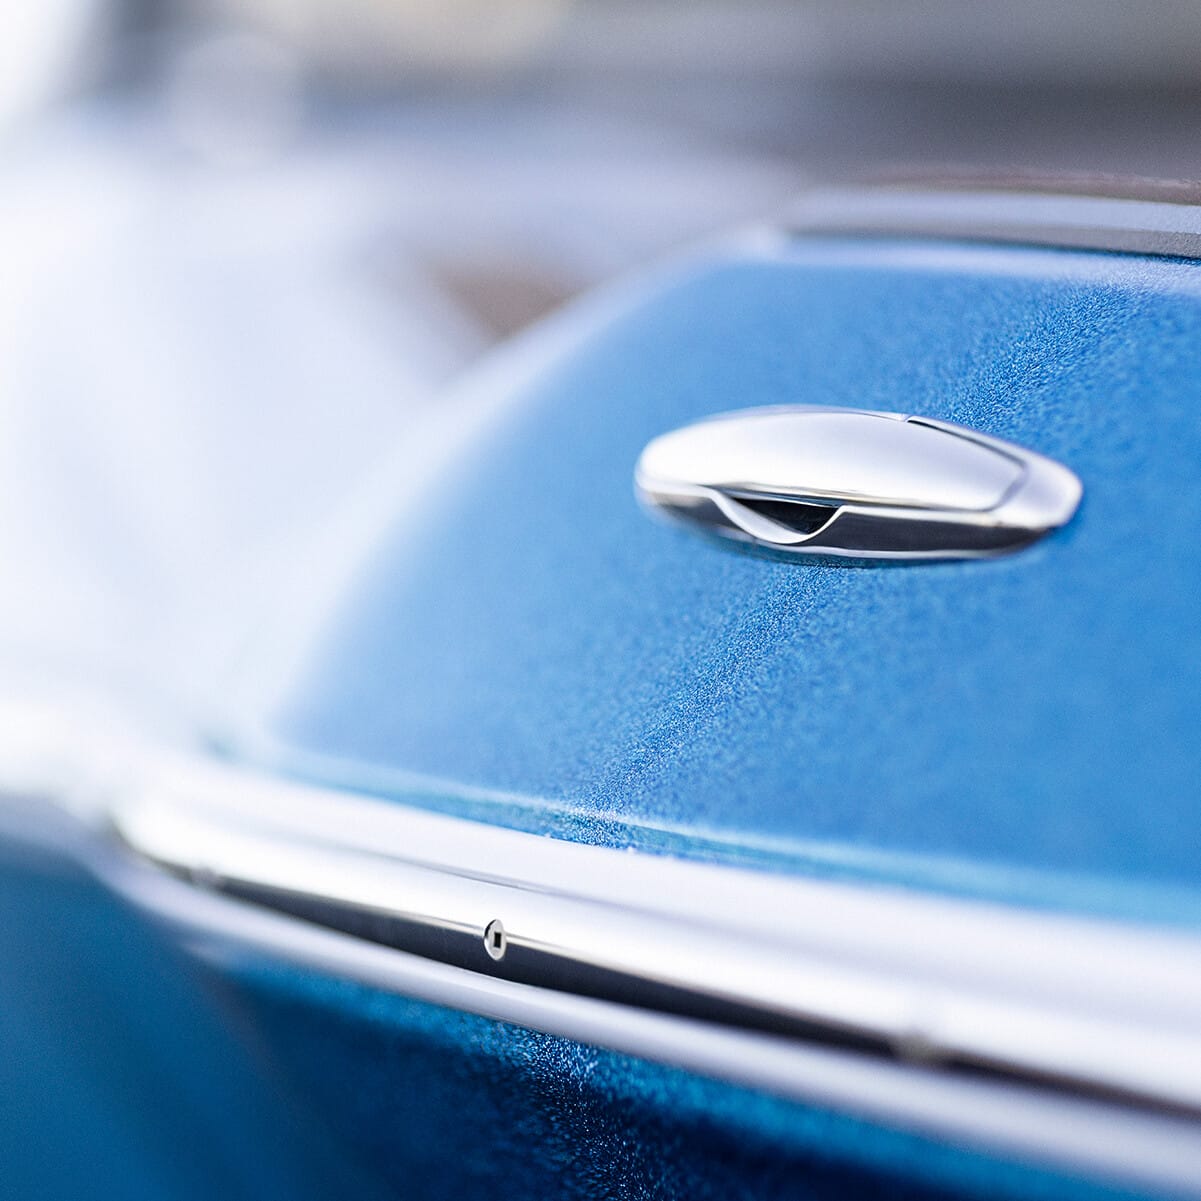 Close-up of a classic car's metallic blue door, featuring a chrome door handle and trim. The background is blurred.